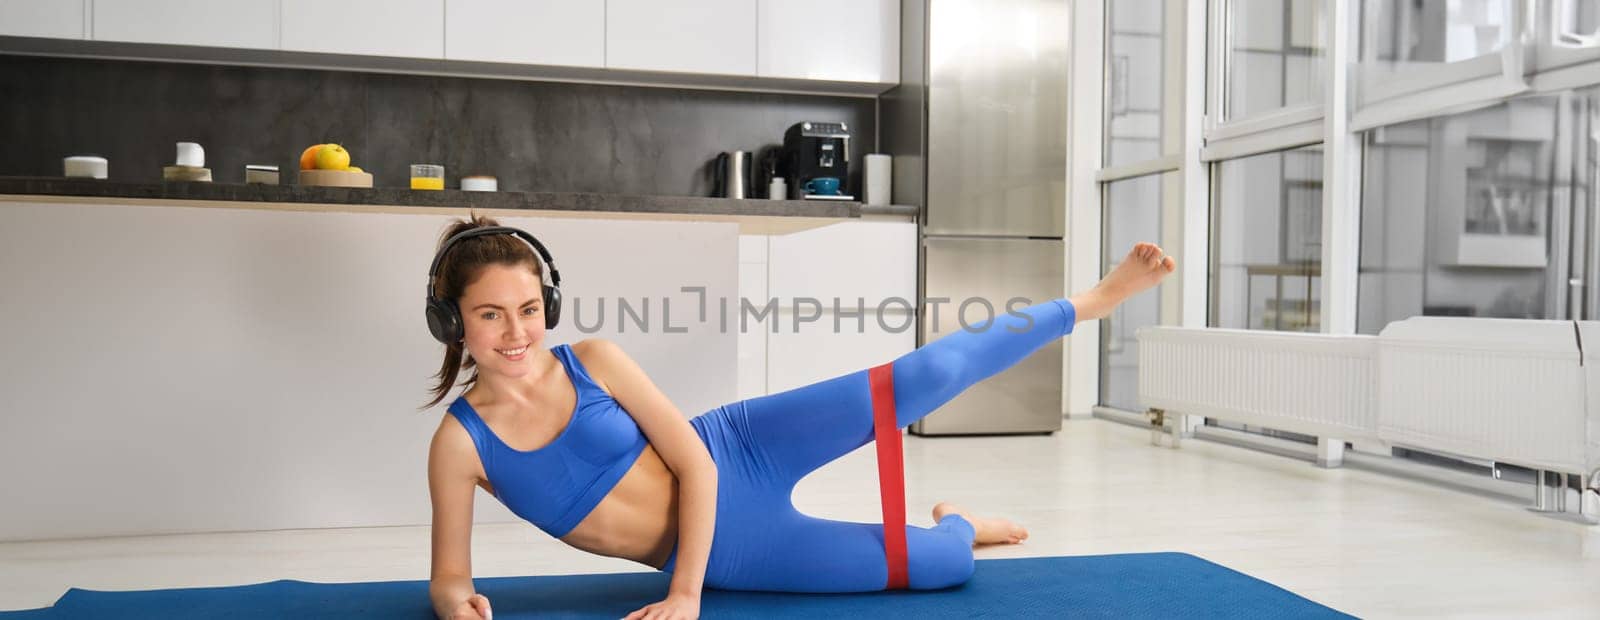 Workout and fitness concept. Woman in headphones does exercises at home, stretching rubber resistance band with legs, laying on yoga mat in living room, lifting her foot up.